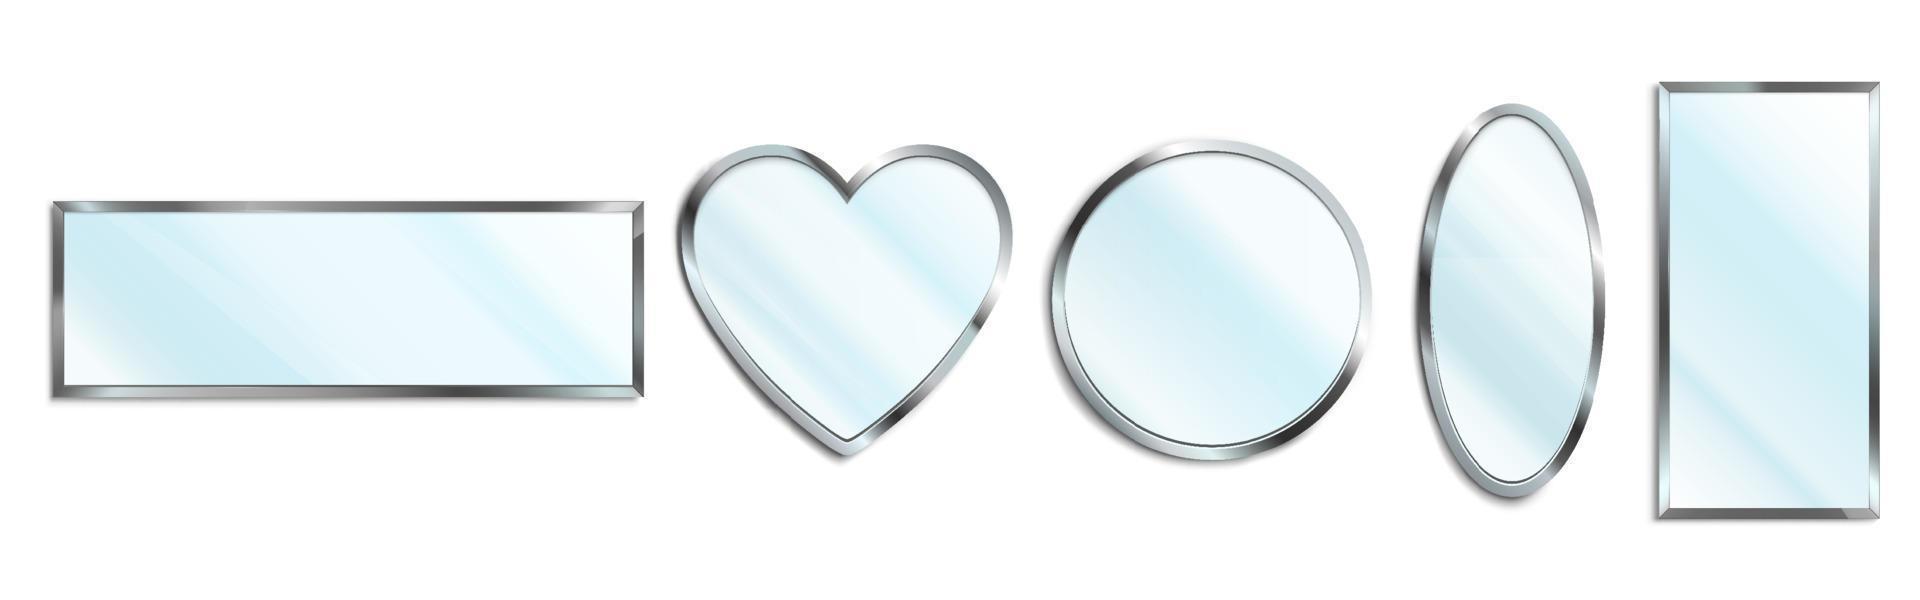 Mirrors in chrome frame different shapes vector